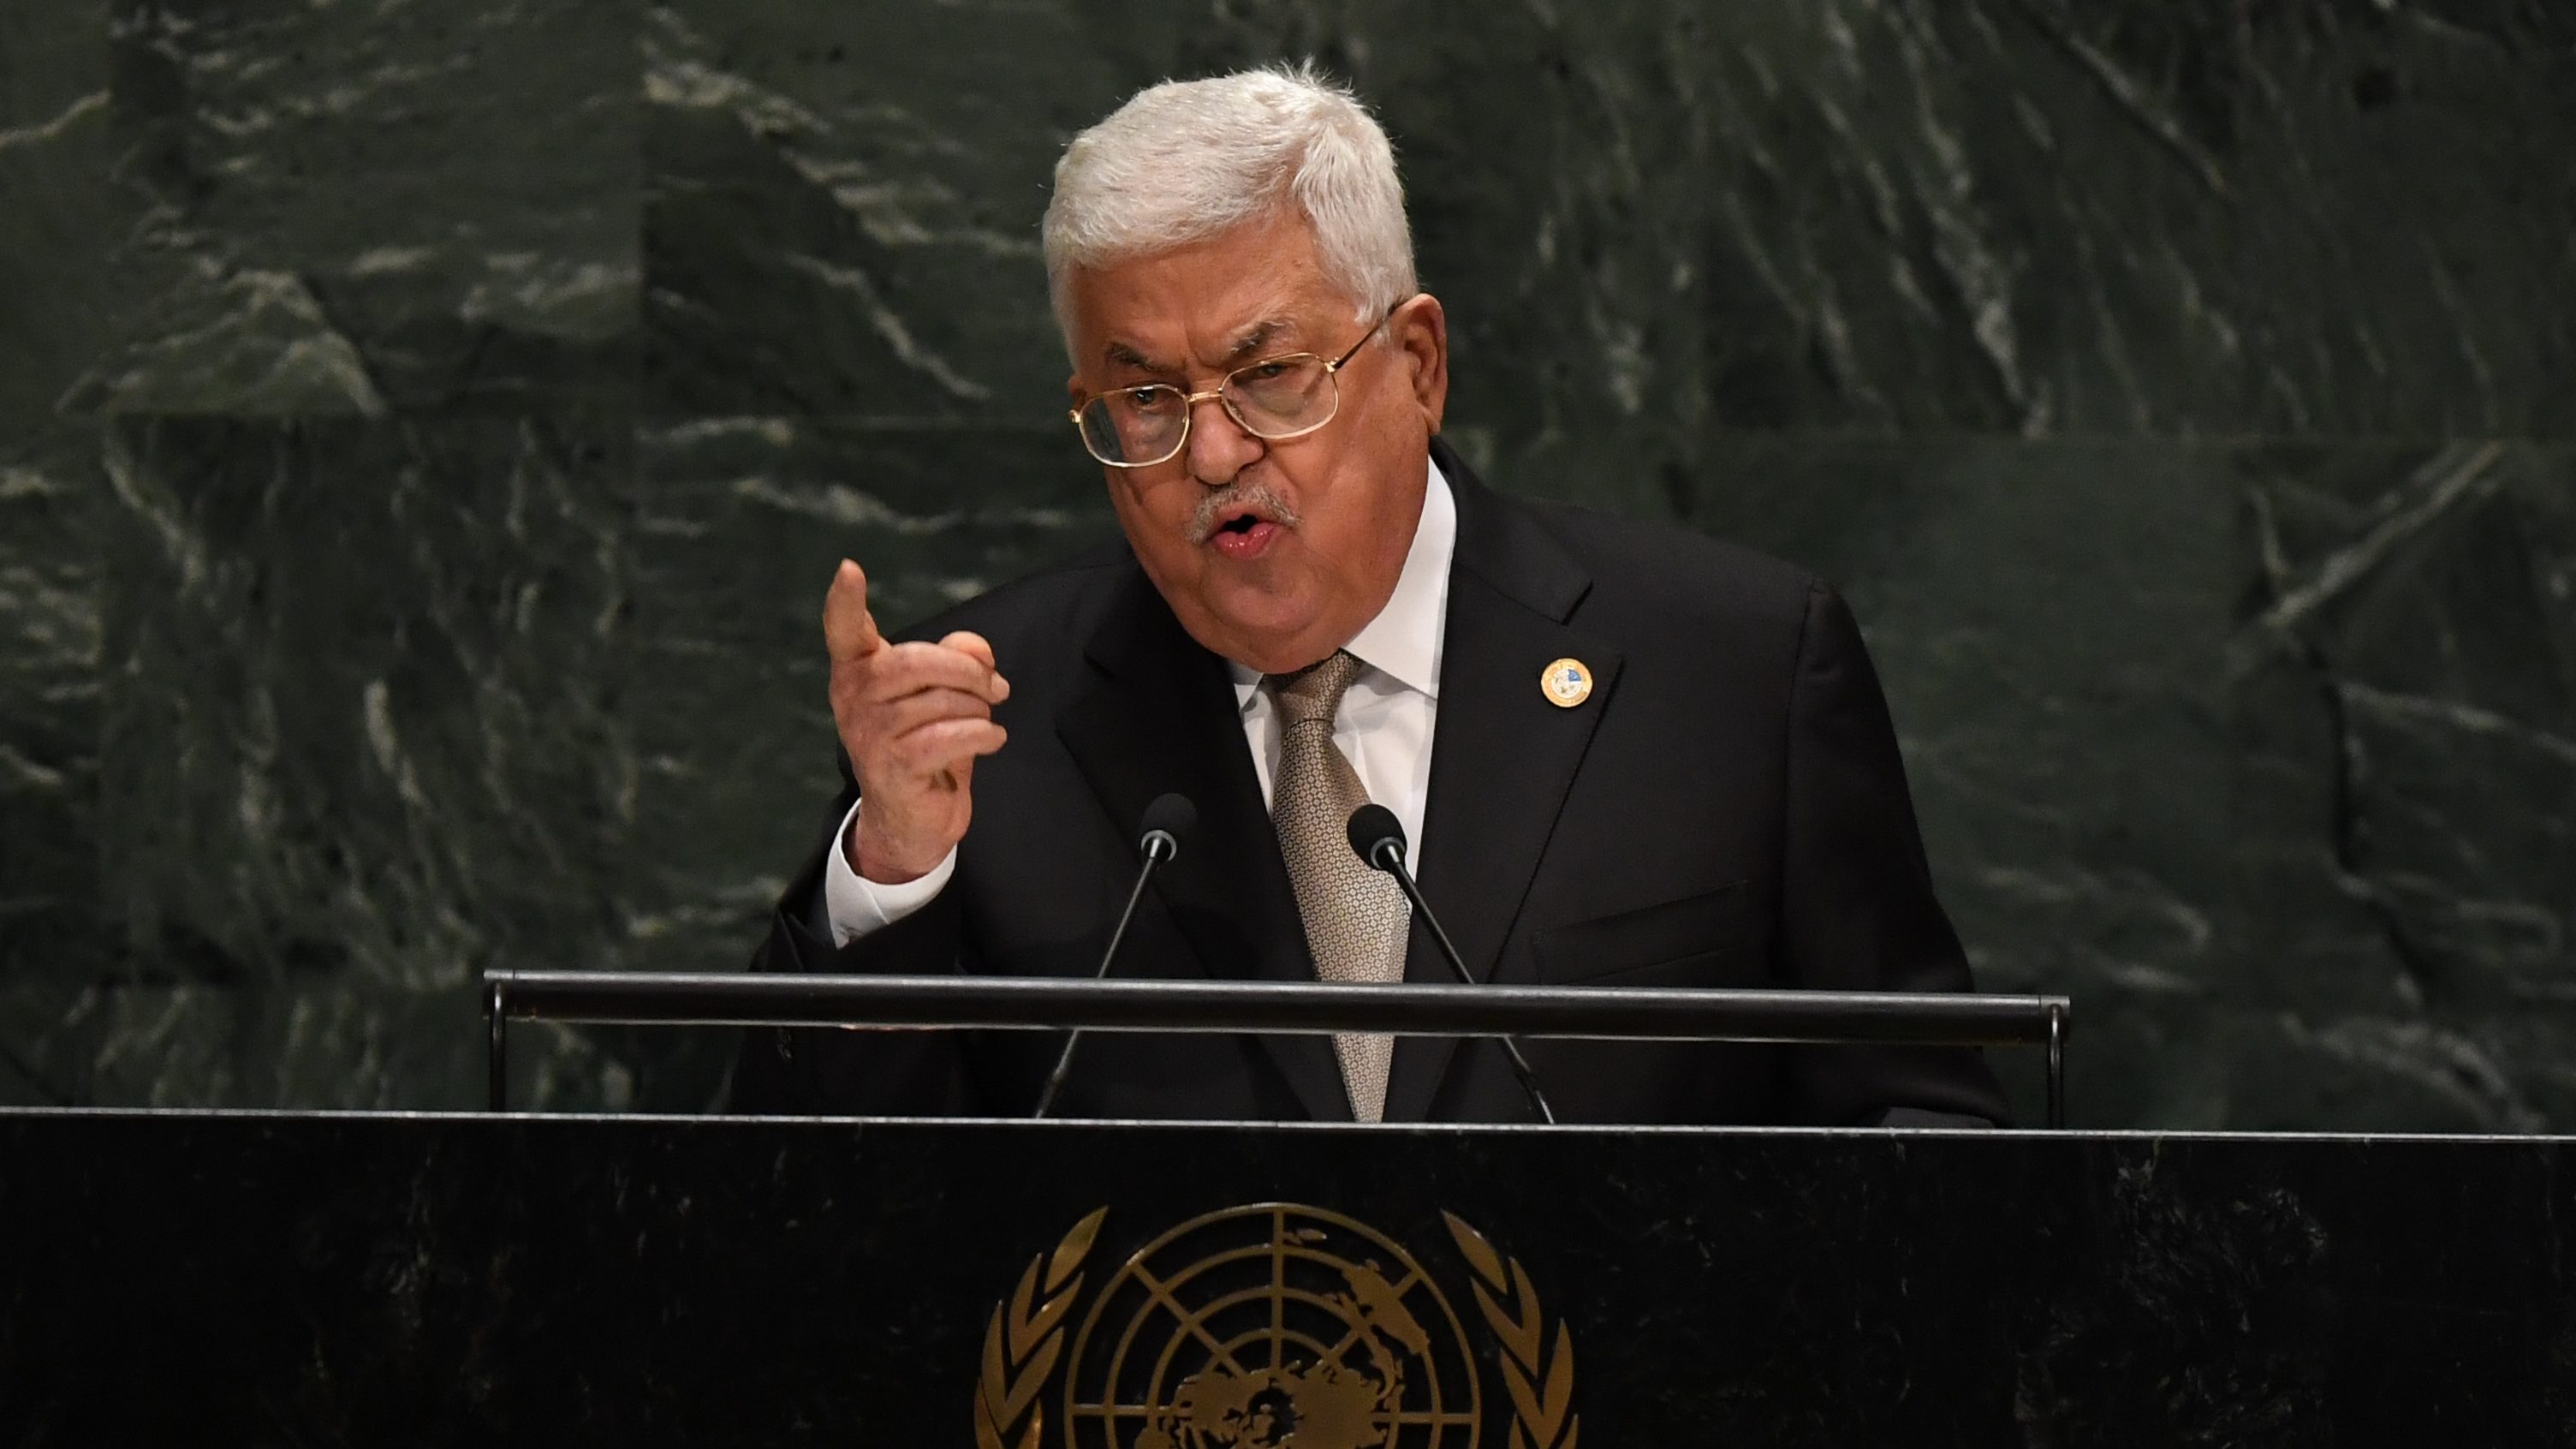 The Media Line Exclusive: The State of Abbas 15 Years Later